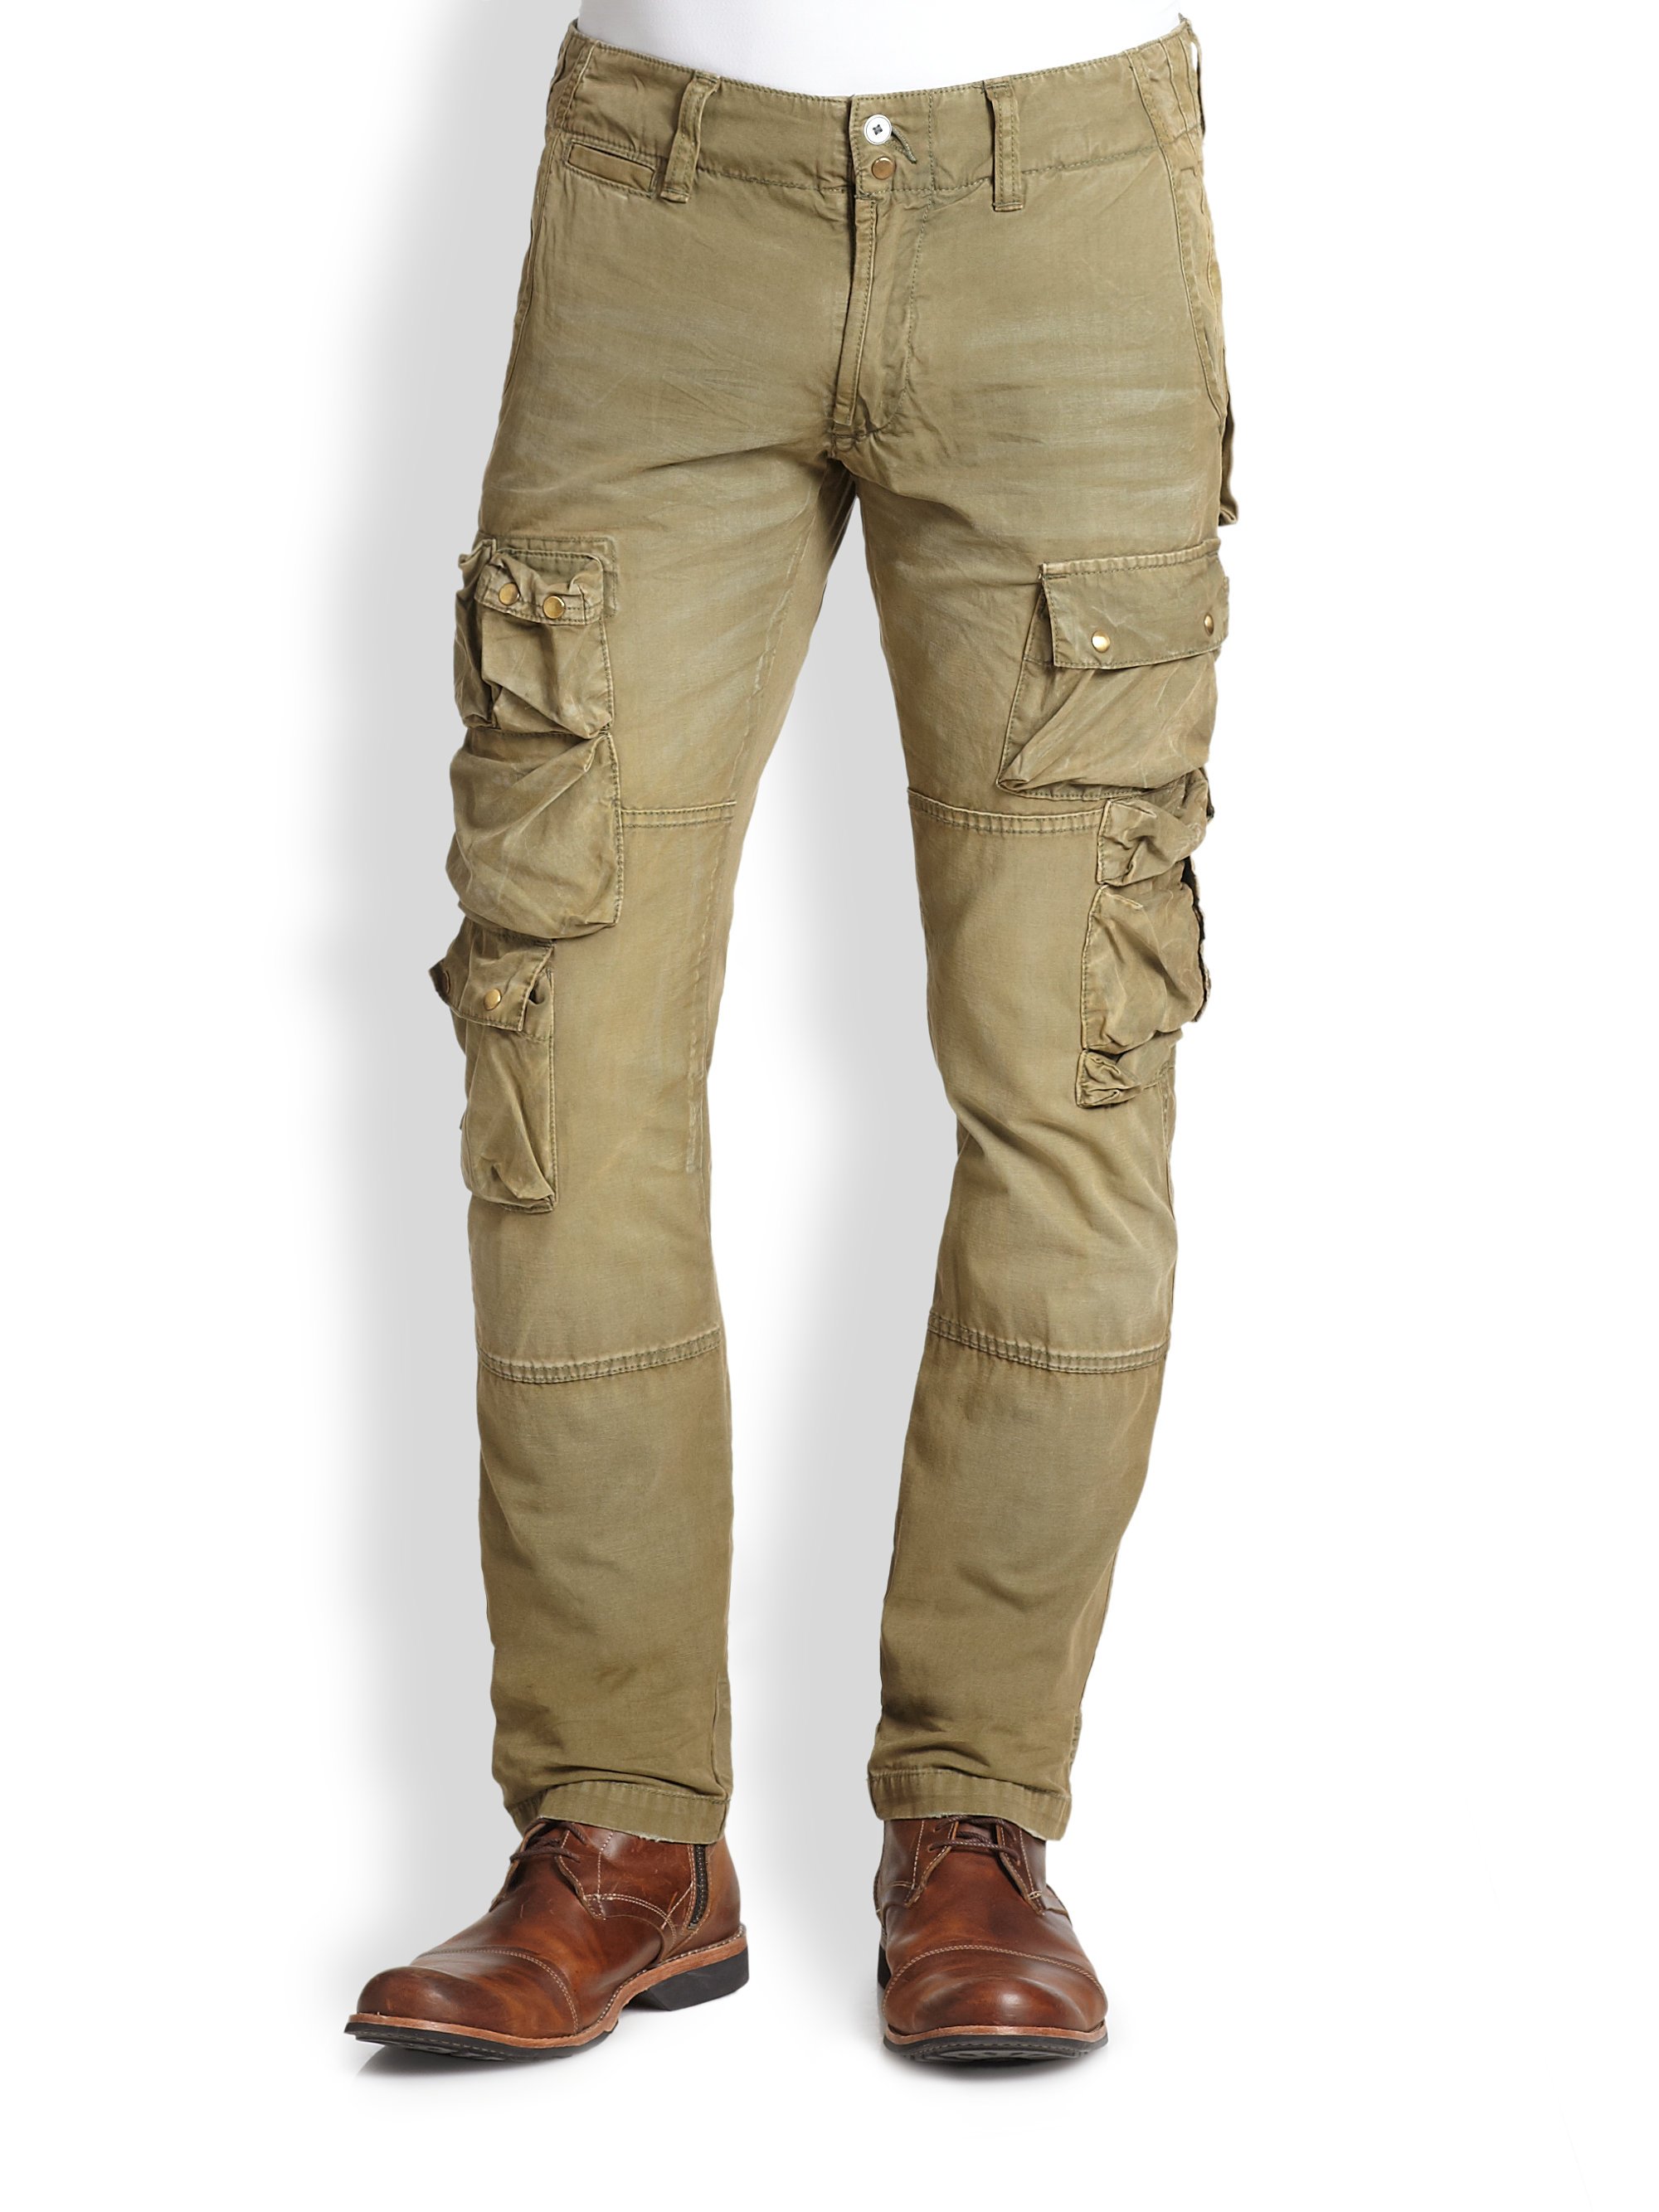 Lyst - Prps Cotton Cargo Pants in Green for Men